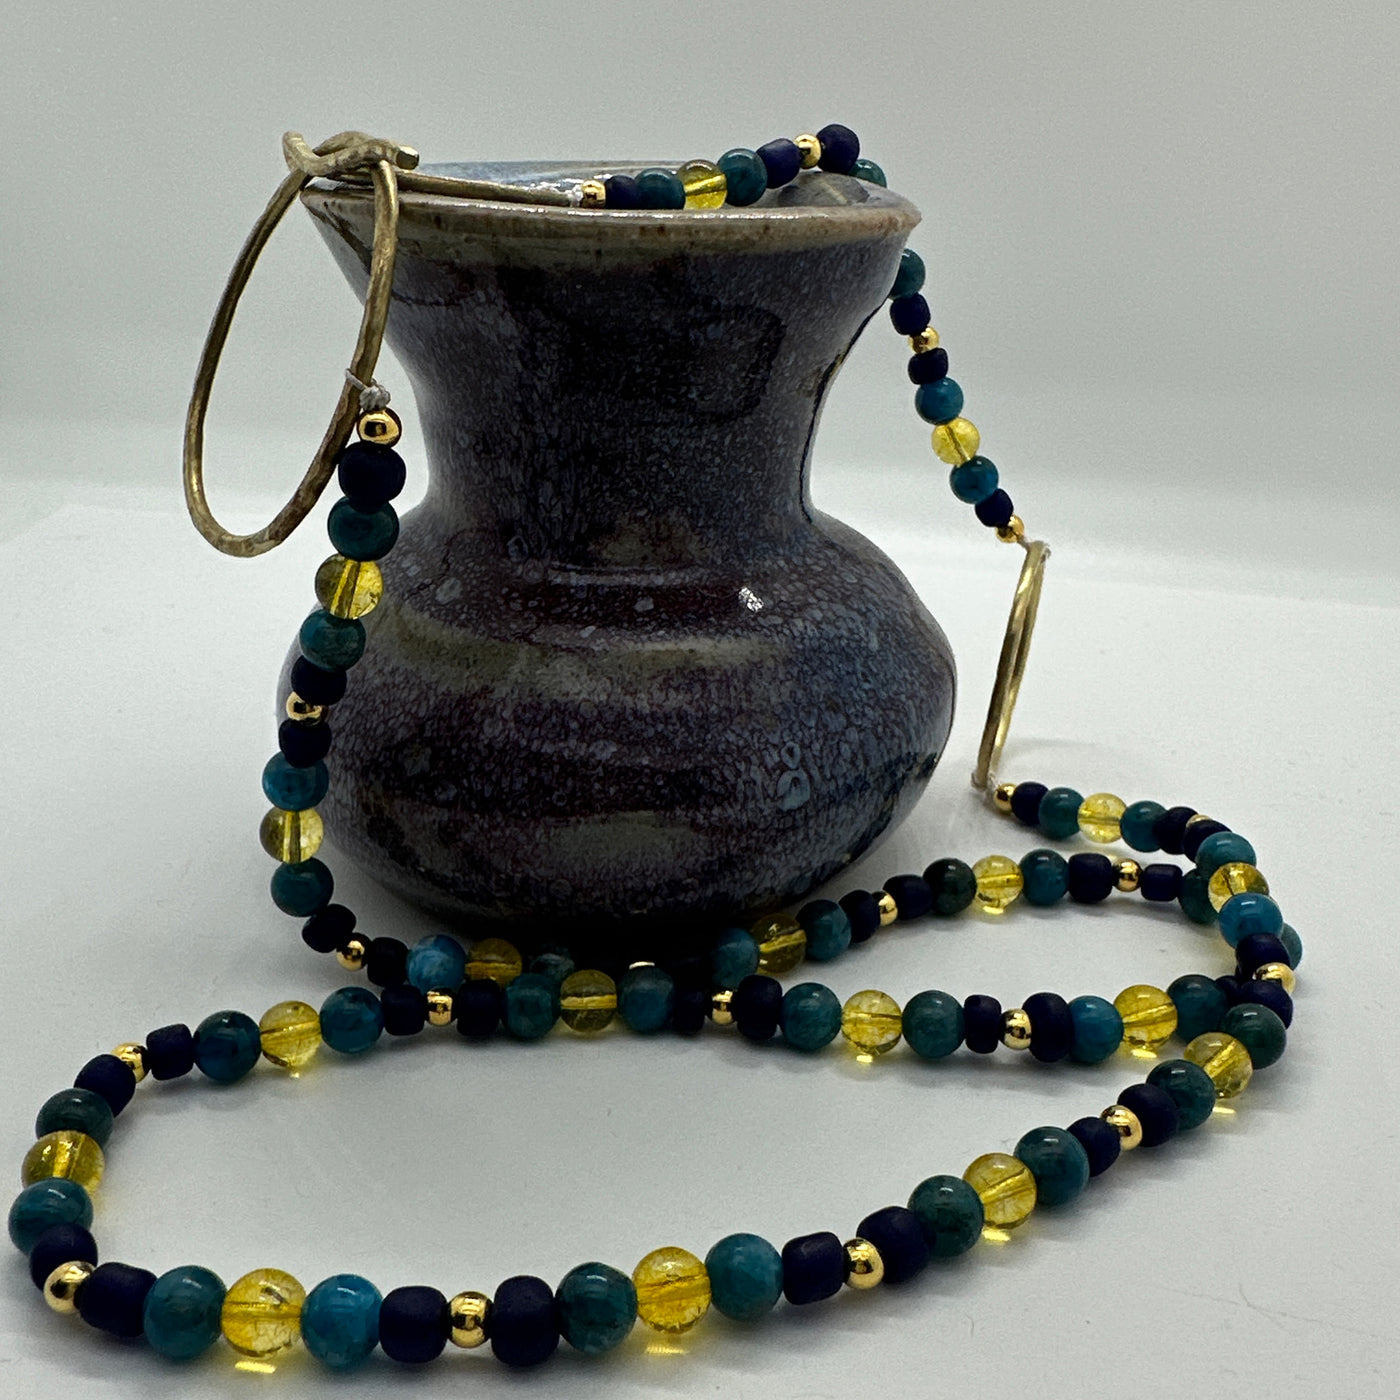 Cytrine, blue glass, blue tiger eyes beads and brass hammered closure